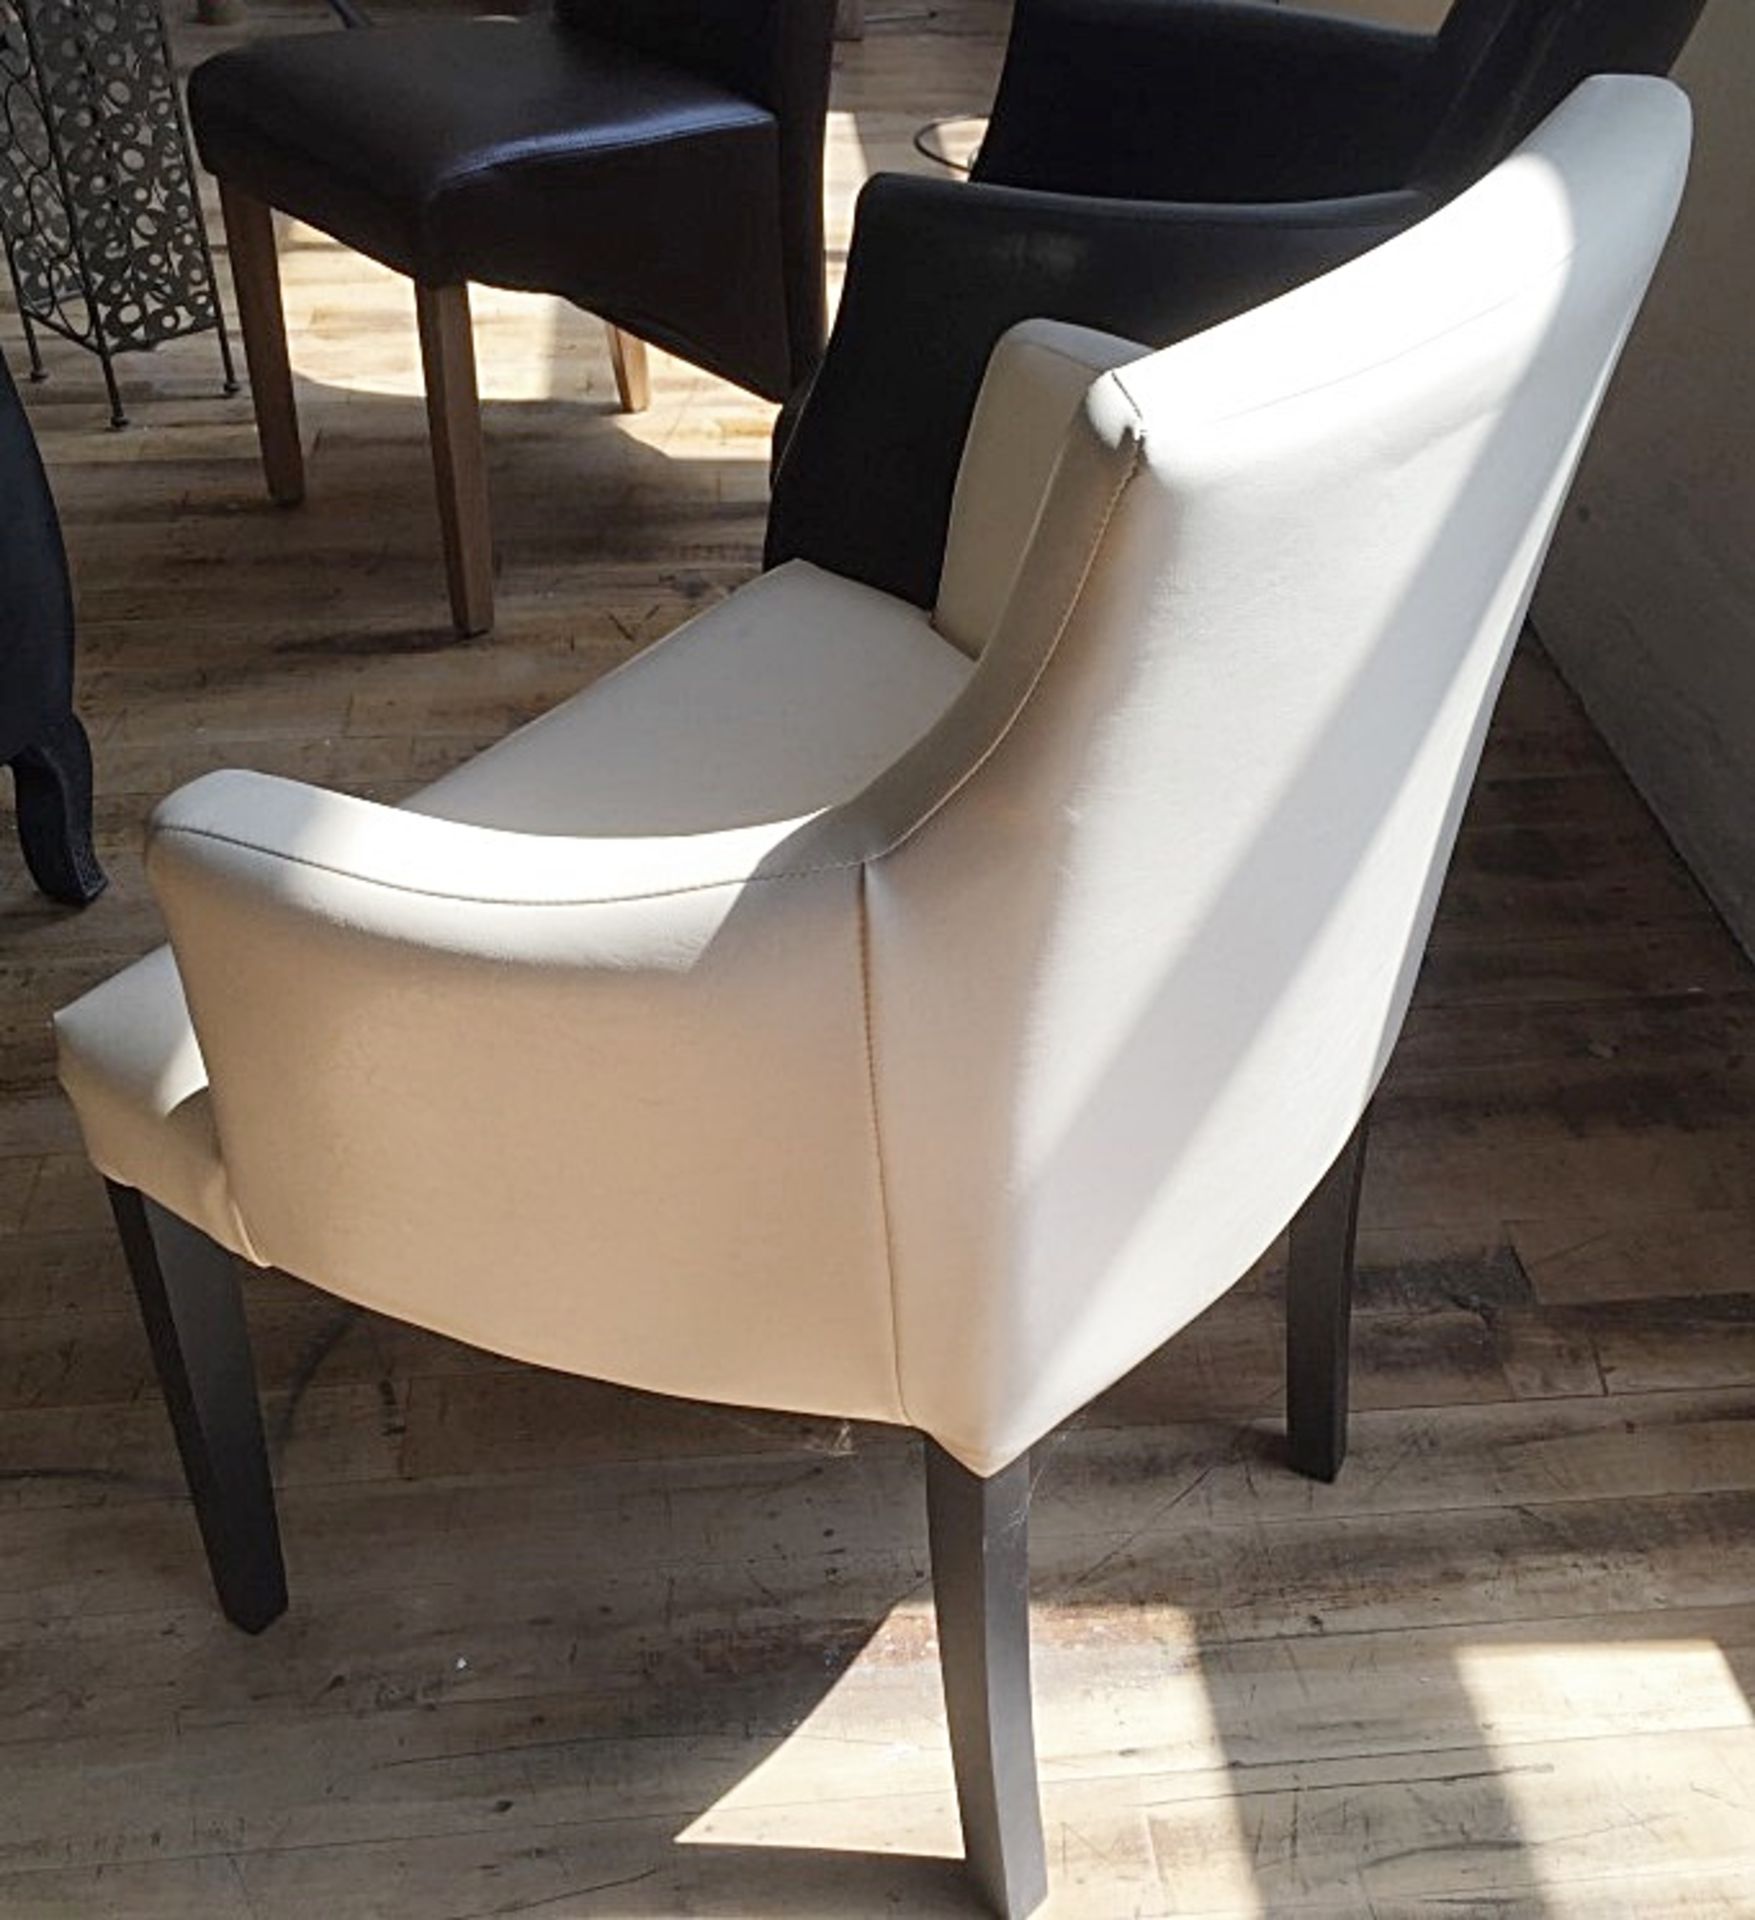 1 x Faux Leather Chair In Cream - Ref: NDE016B - CL122 - Location: Bury BL8 All furniture items - Image 4 of 4